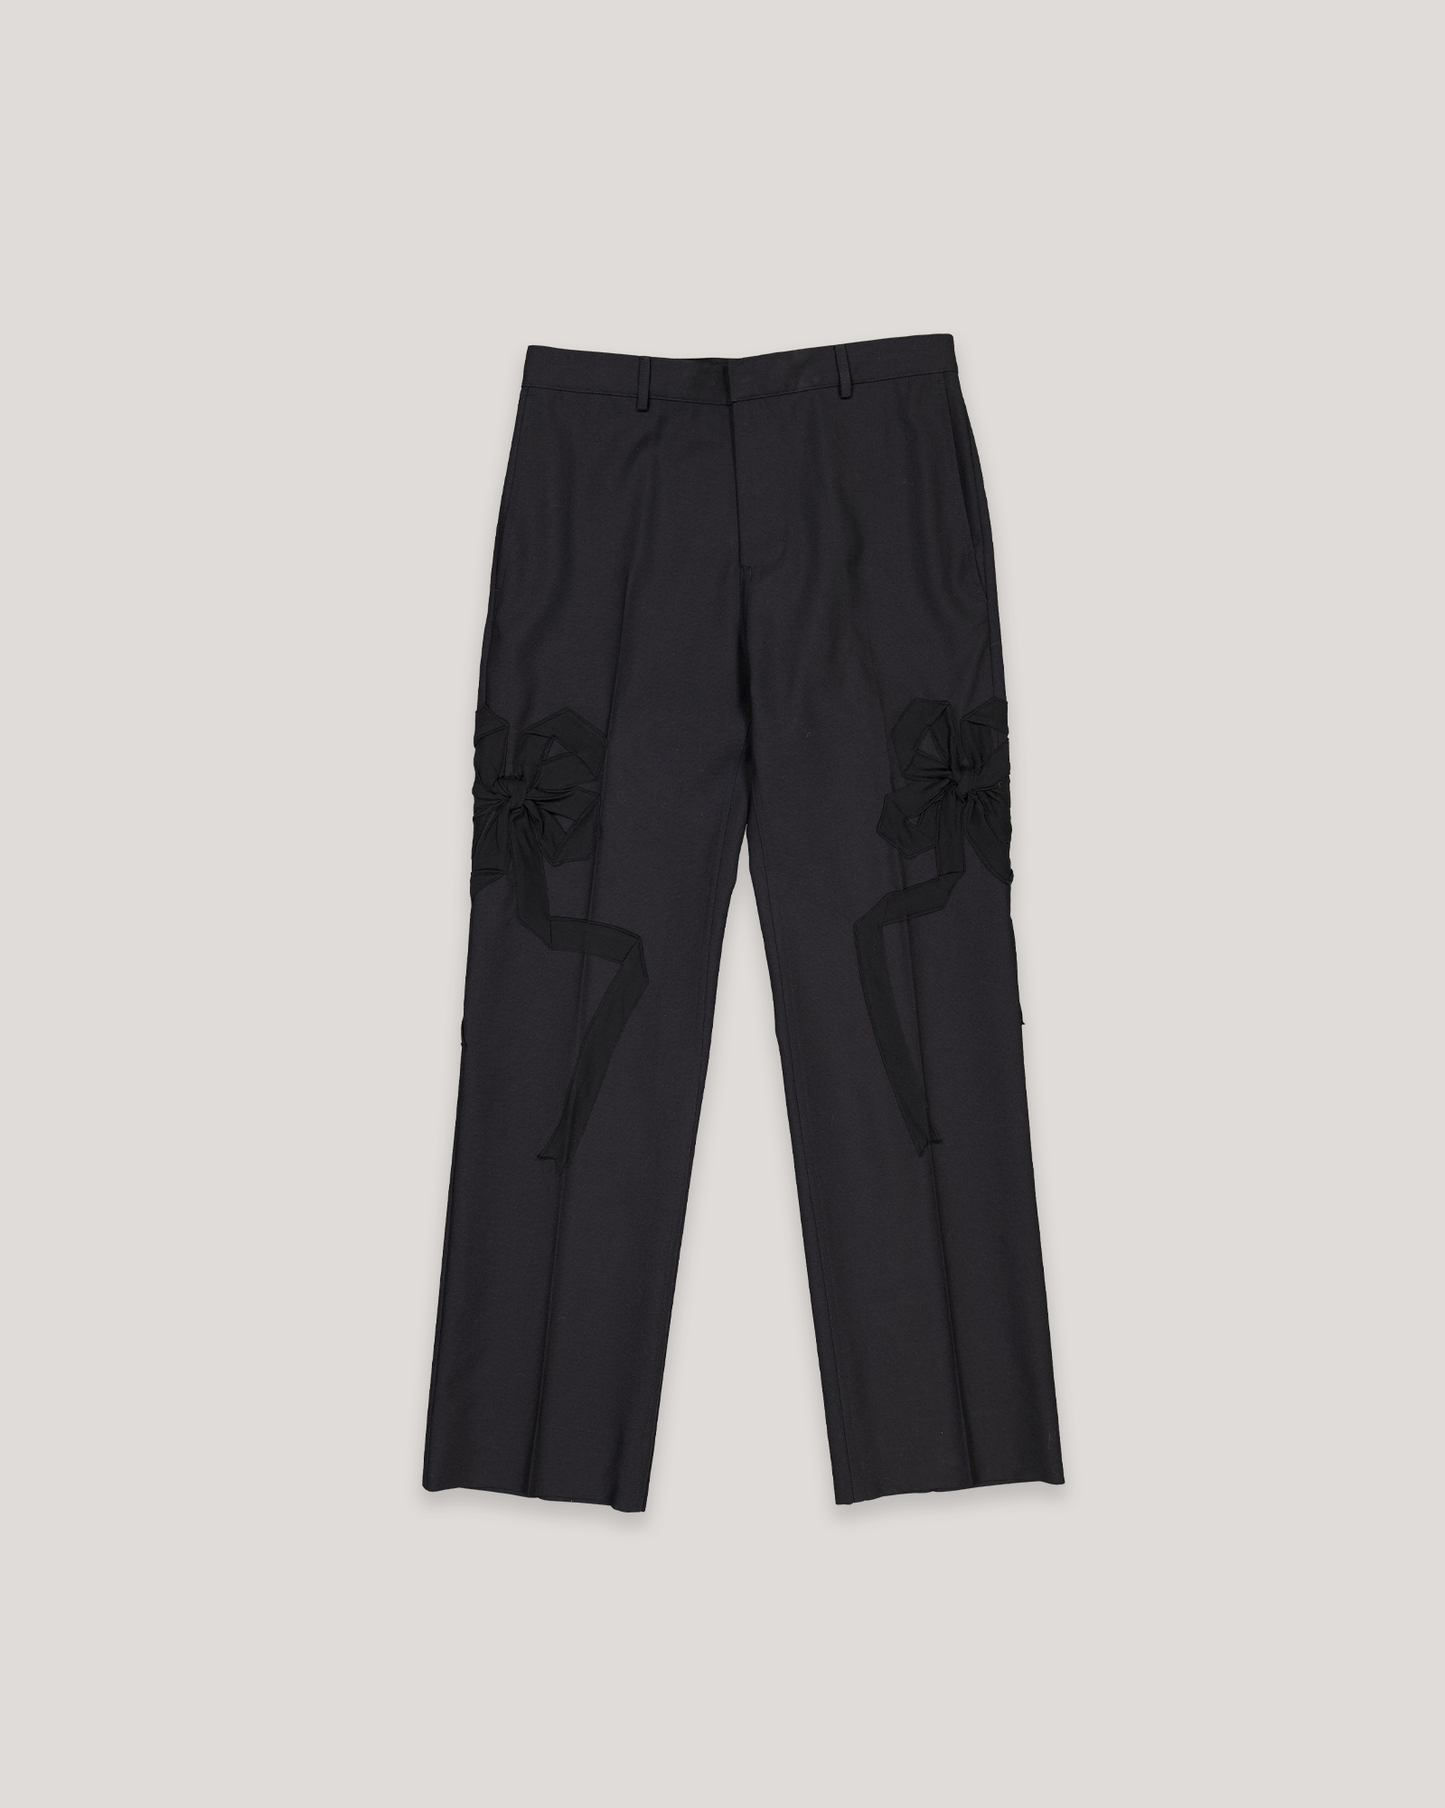 STEFAN COOKE TAILORED TROUSER WITH BOWS